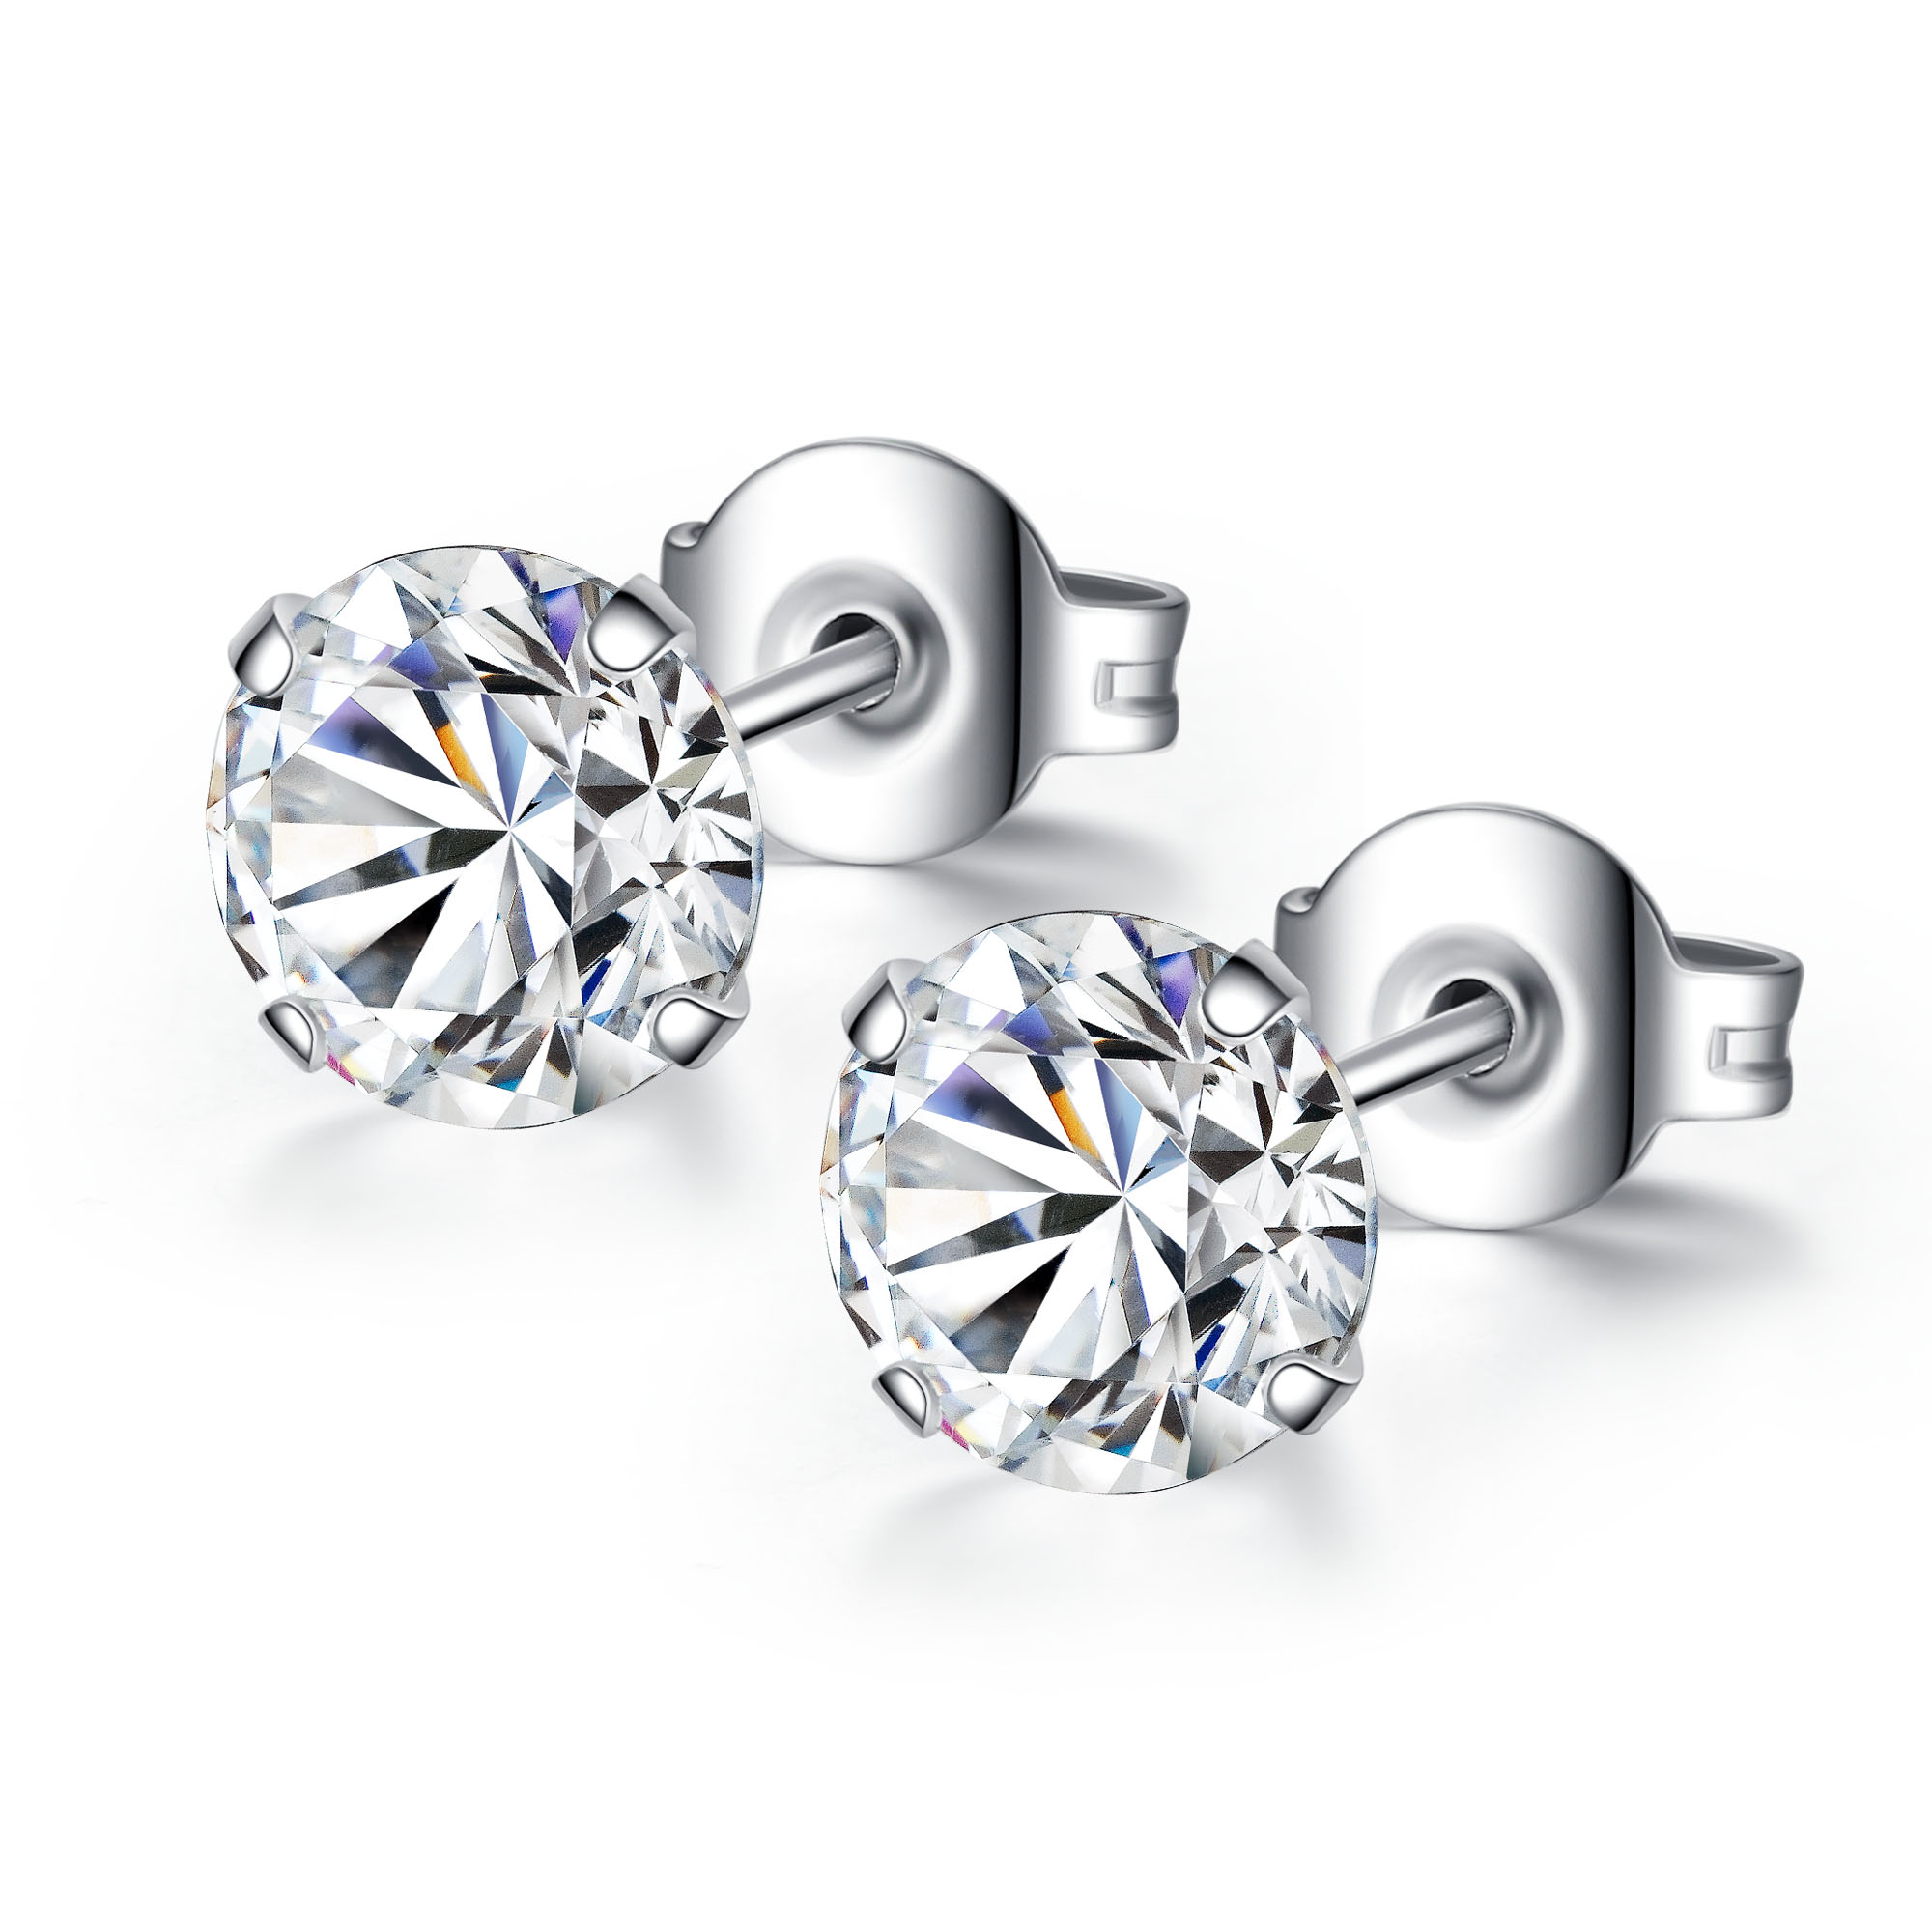 Rhodium plated tri-set with cubic zirconia crystals – T a y l o r s